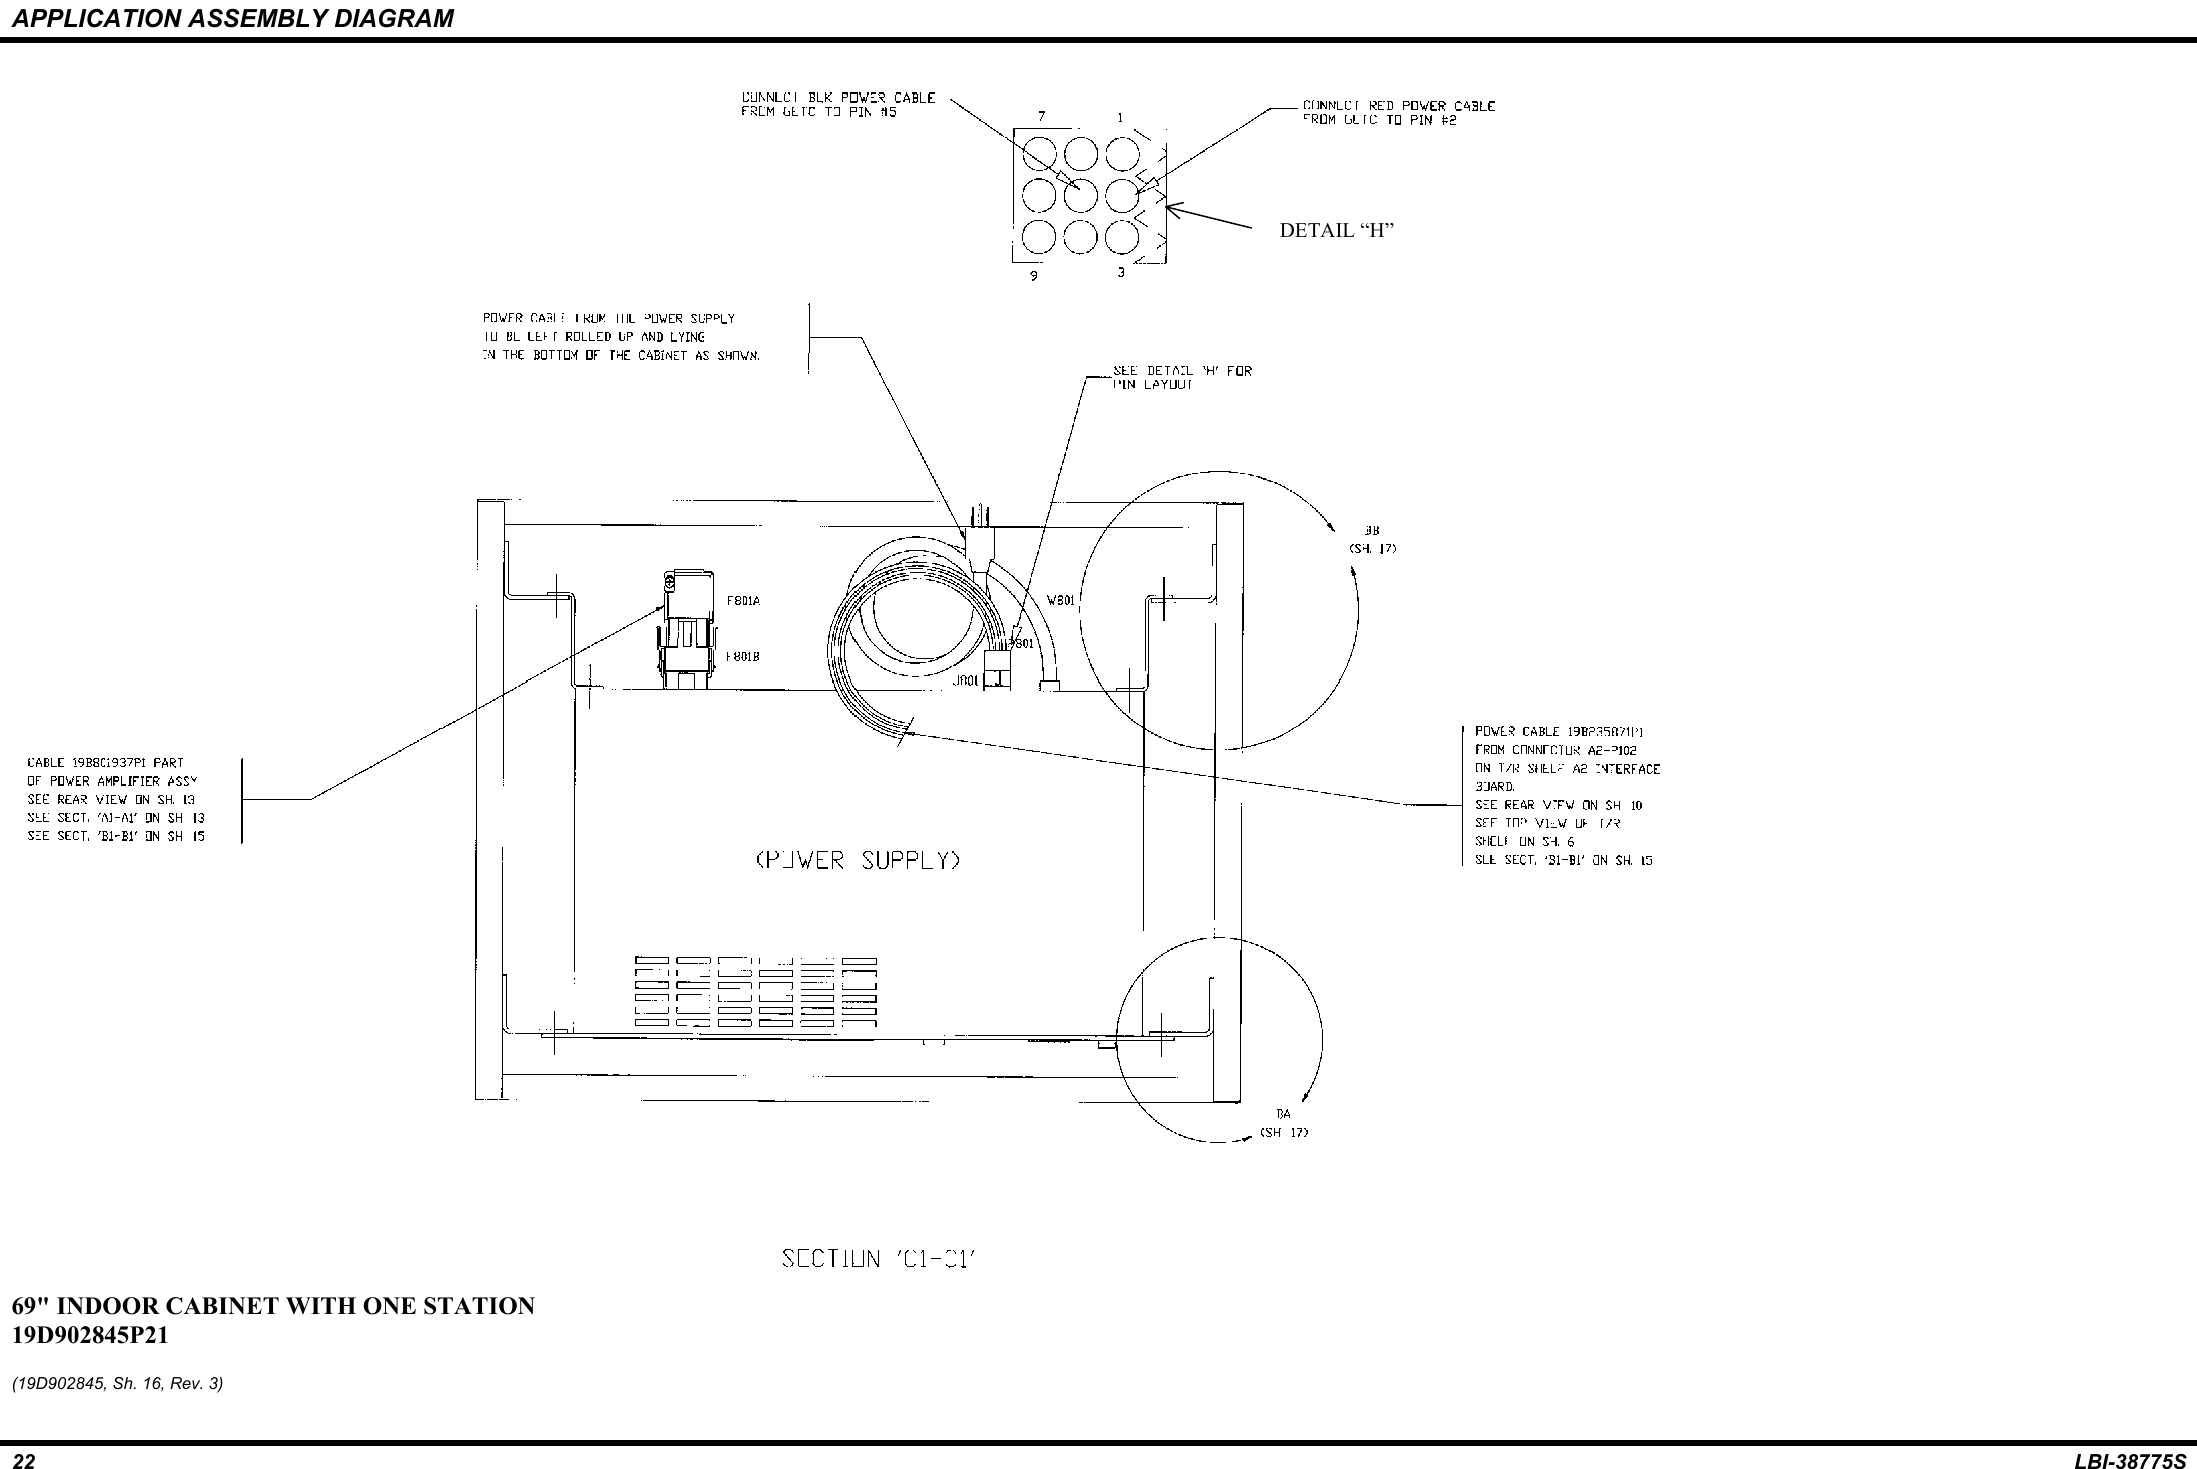 APPLICATION ASSEMBLY DIAGRAM22 LBI-38775S69&quot; INDOOR CABINET WITH ONE STATION19D902845P21(19D902845, Sh. 16, Rev. 3)DETAIL “H”